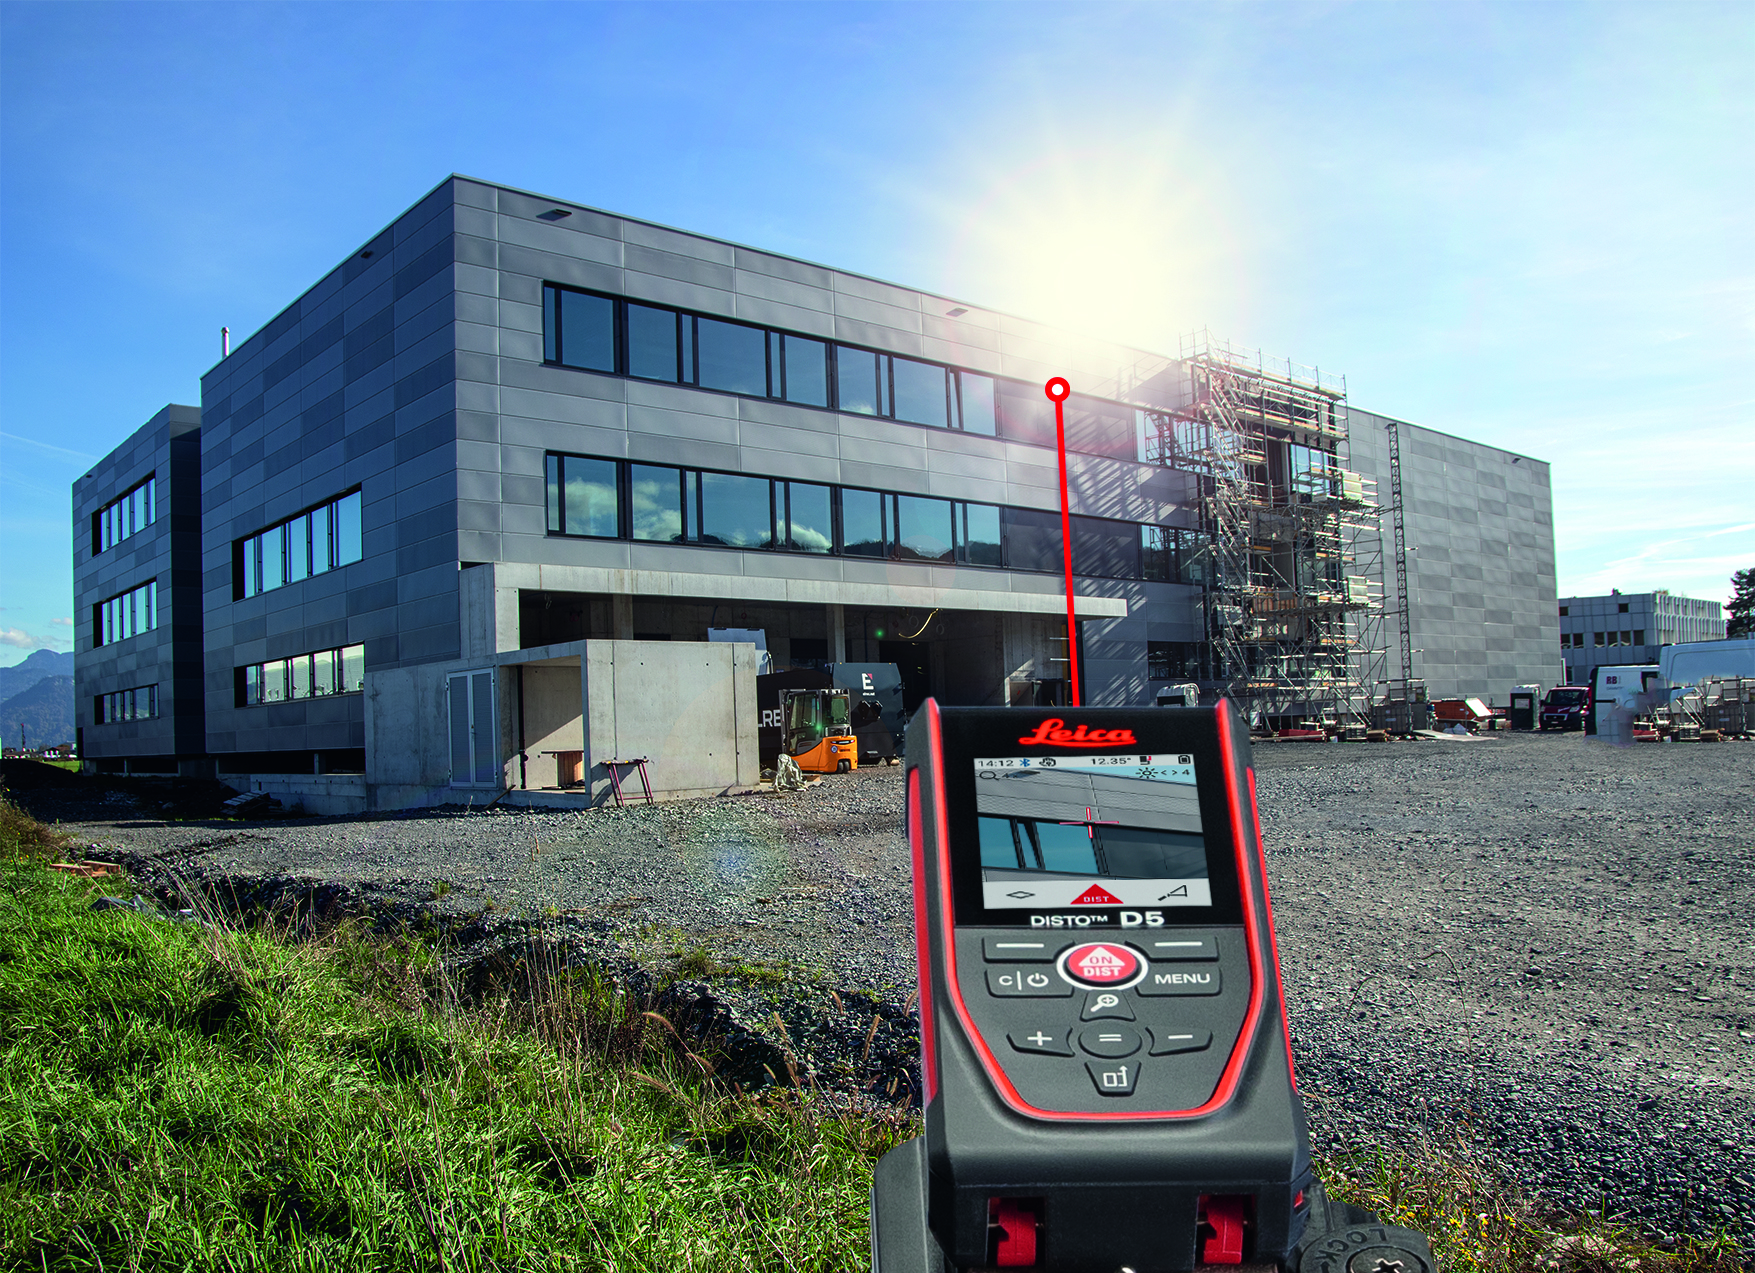 The top edge of a building is targeted with the Leica DISTO D5. The target appears in the Pointfinder display of the laser measure.